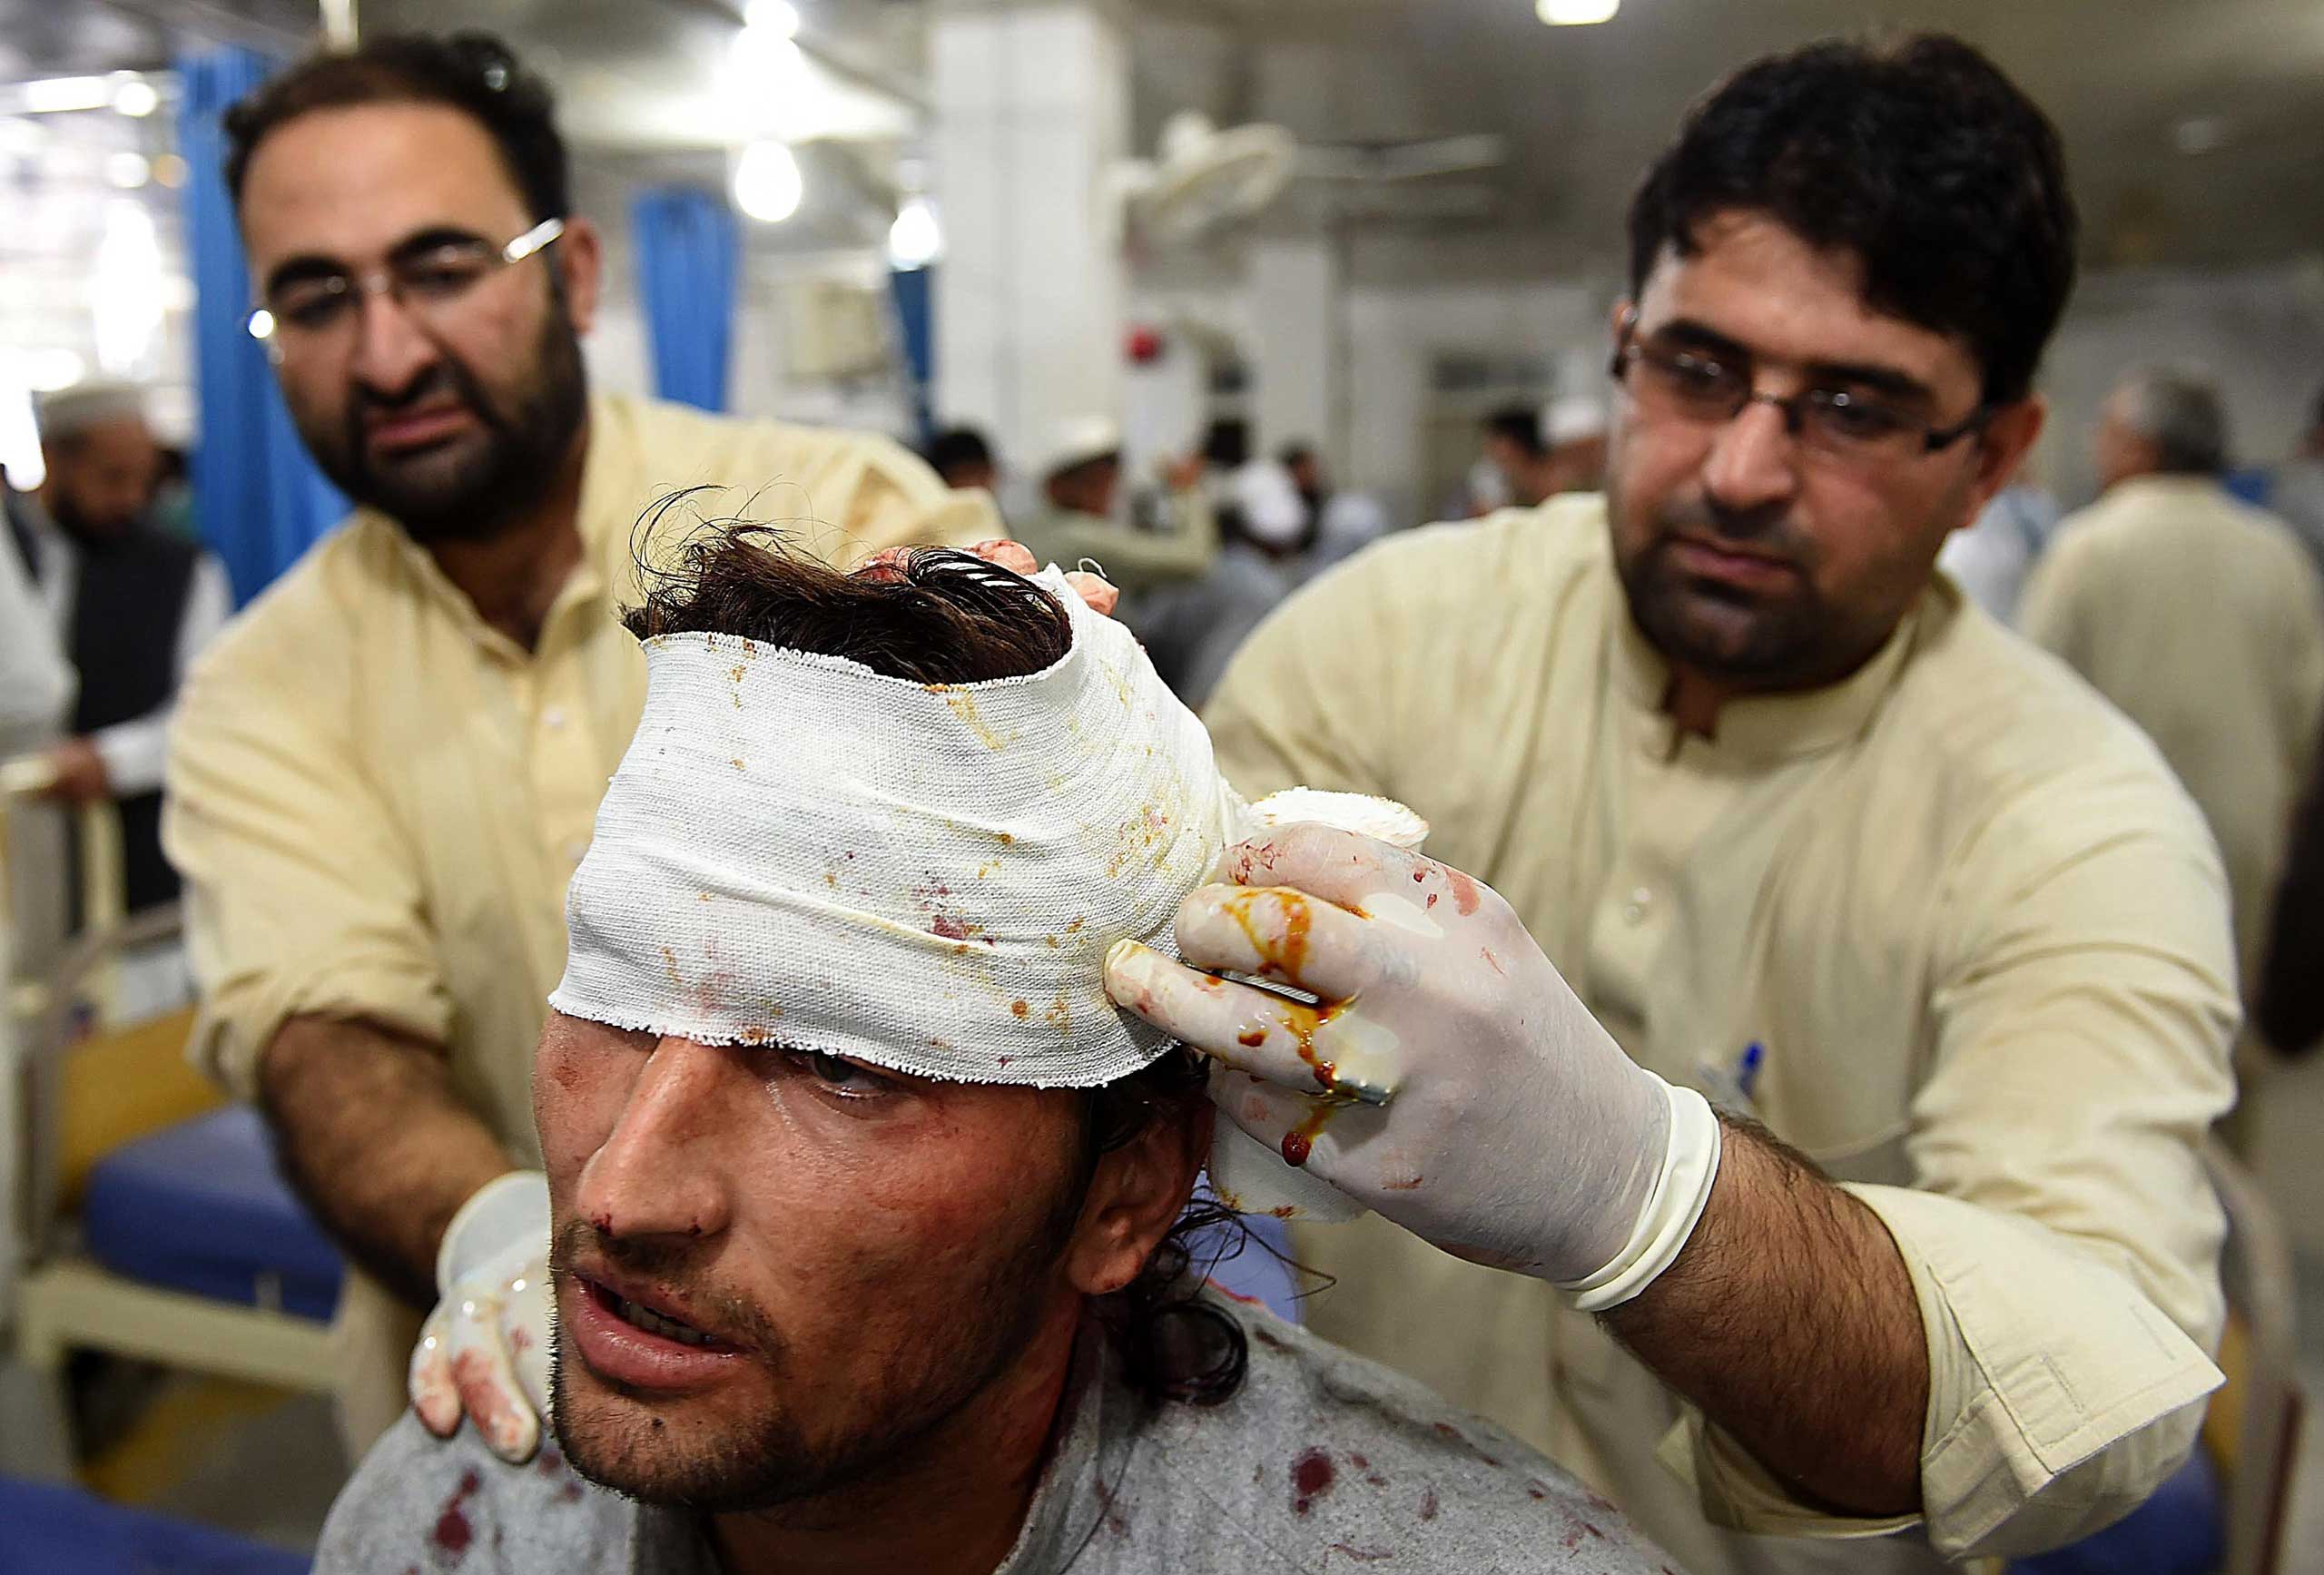 Paramedics treat a man injured in an earthquake at a hospital in Peshawar, Pakistan, on Oct. 26, 2015.